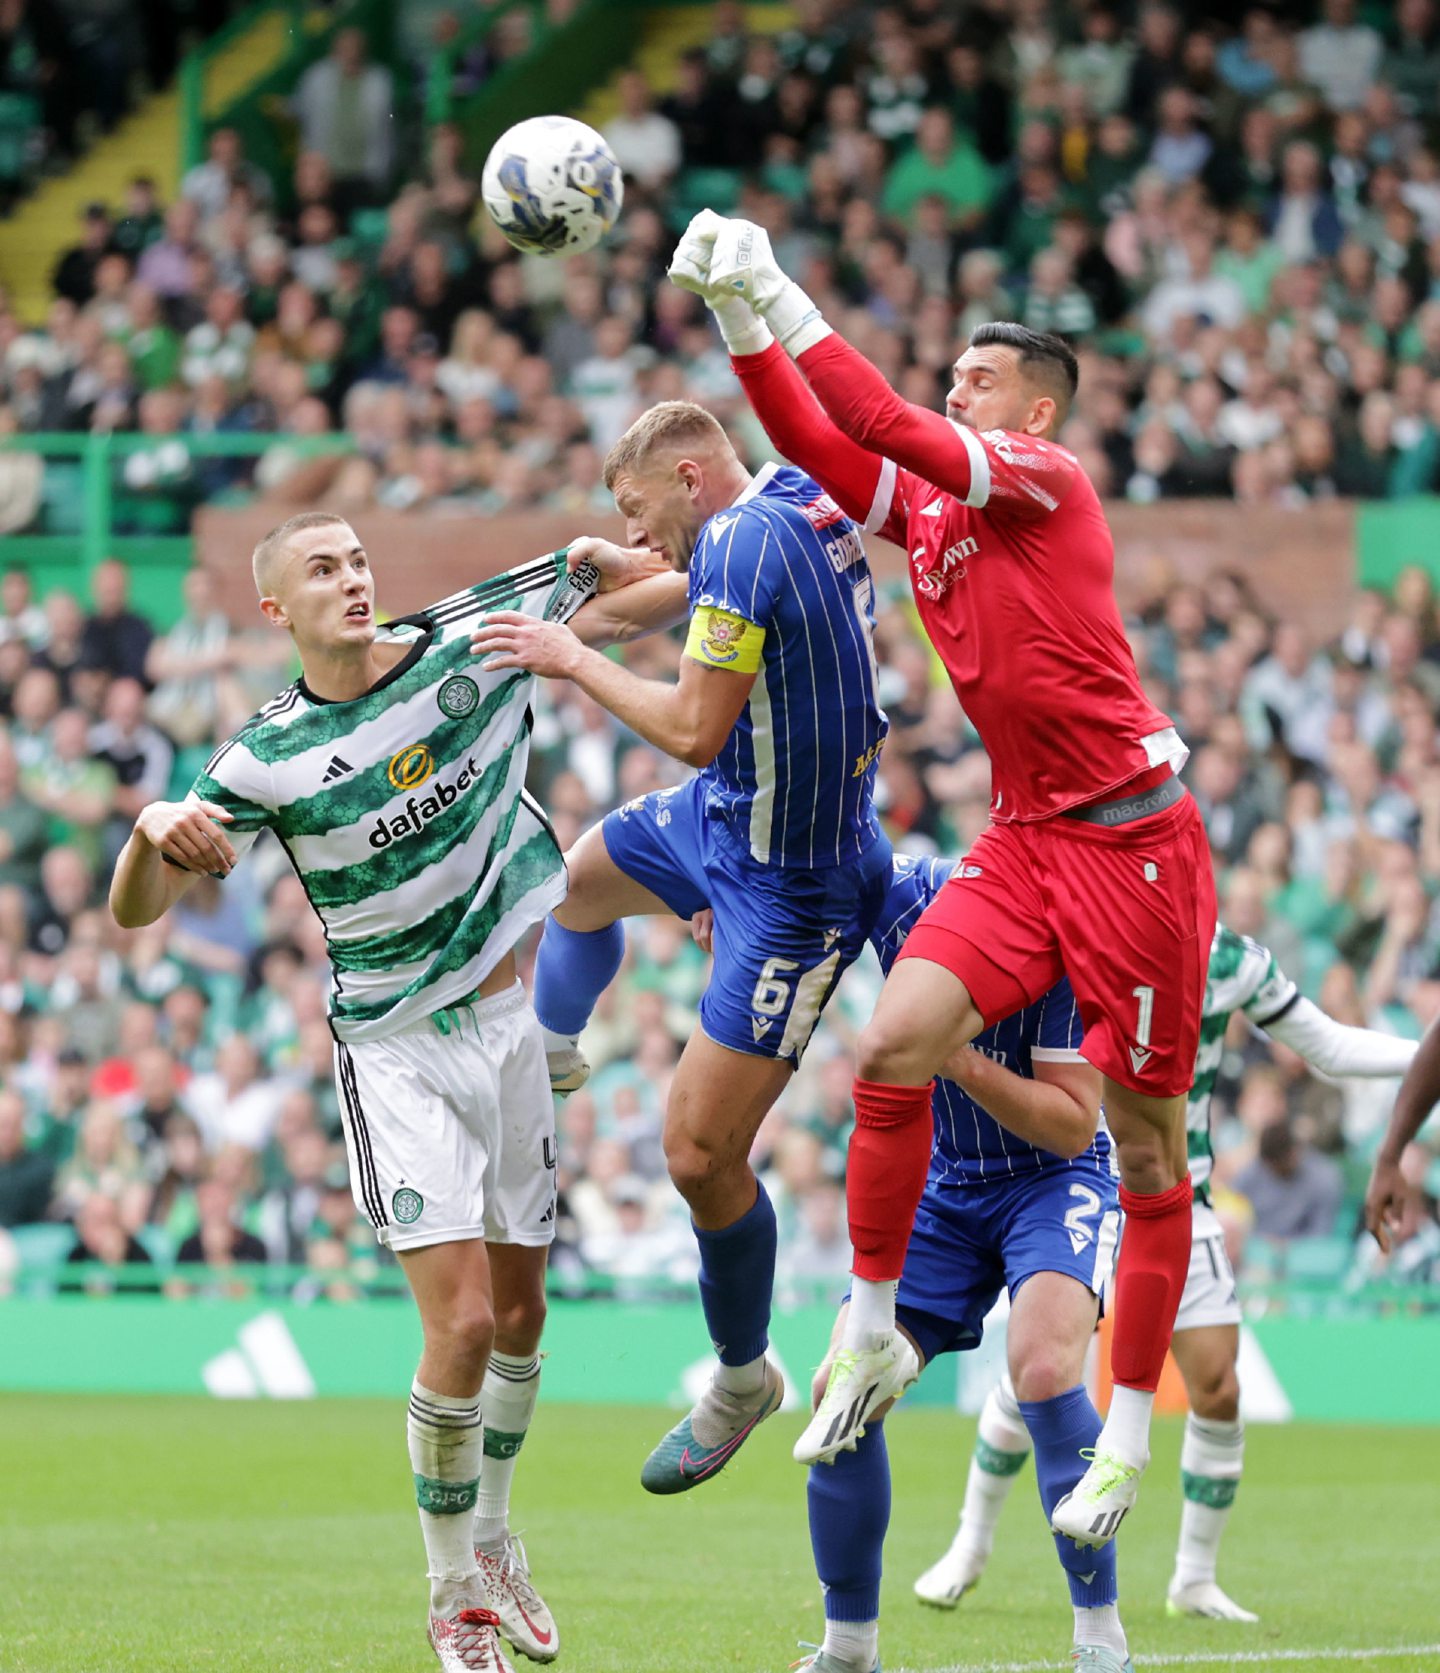 St Johnstone goalkeeper Dimitar Mitov attempts to punch the ball clear against Celtic. Image: PA 